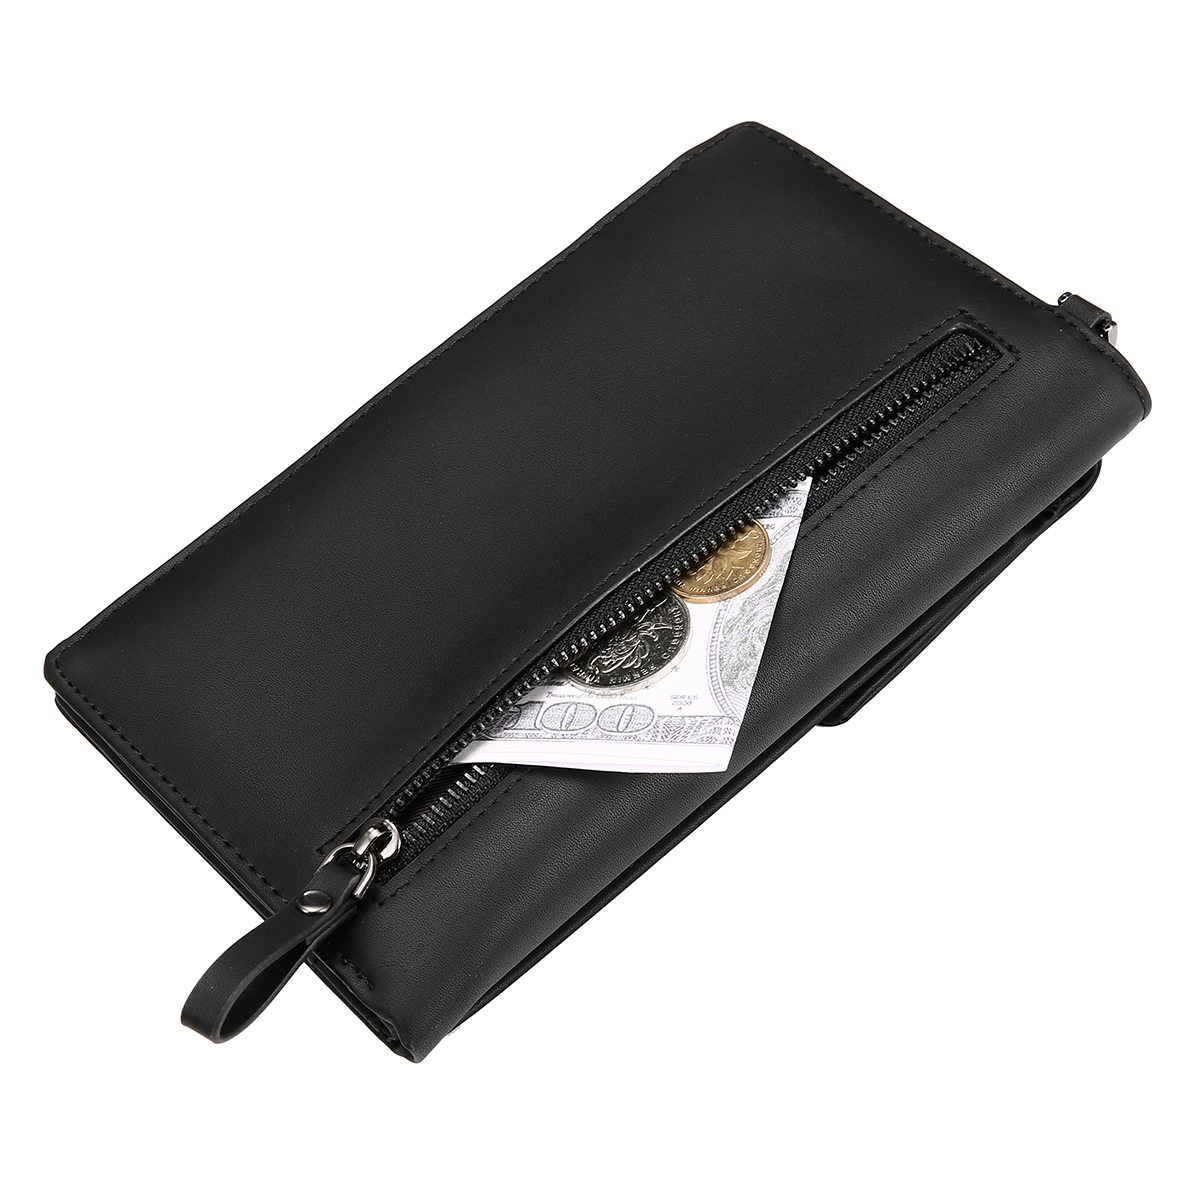 Fashion-Folding-with-Multi-Card-Slots-PU-Leather-Wallet-Purse-Mobile-Phone-Storage-Shoulder-Bag-1868718-8